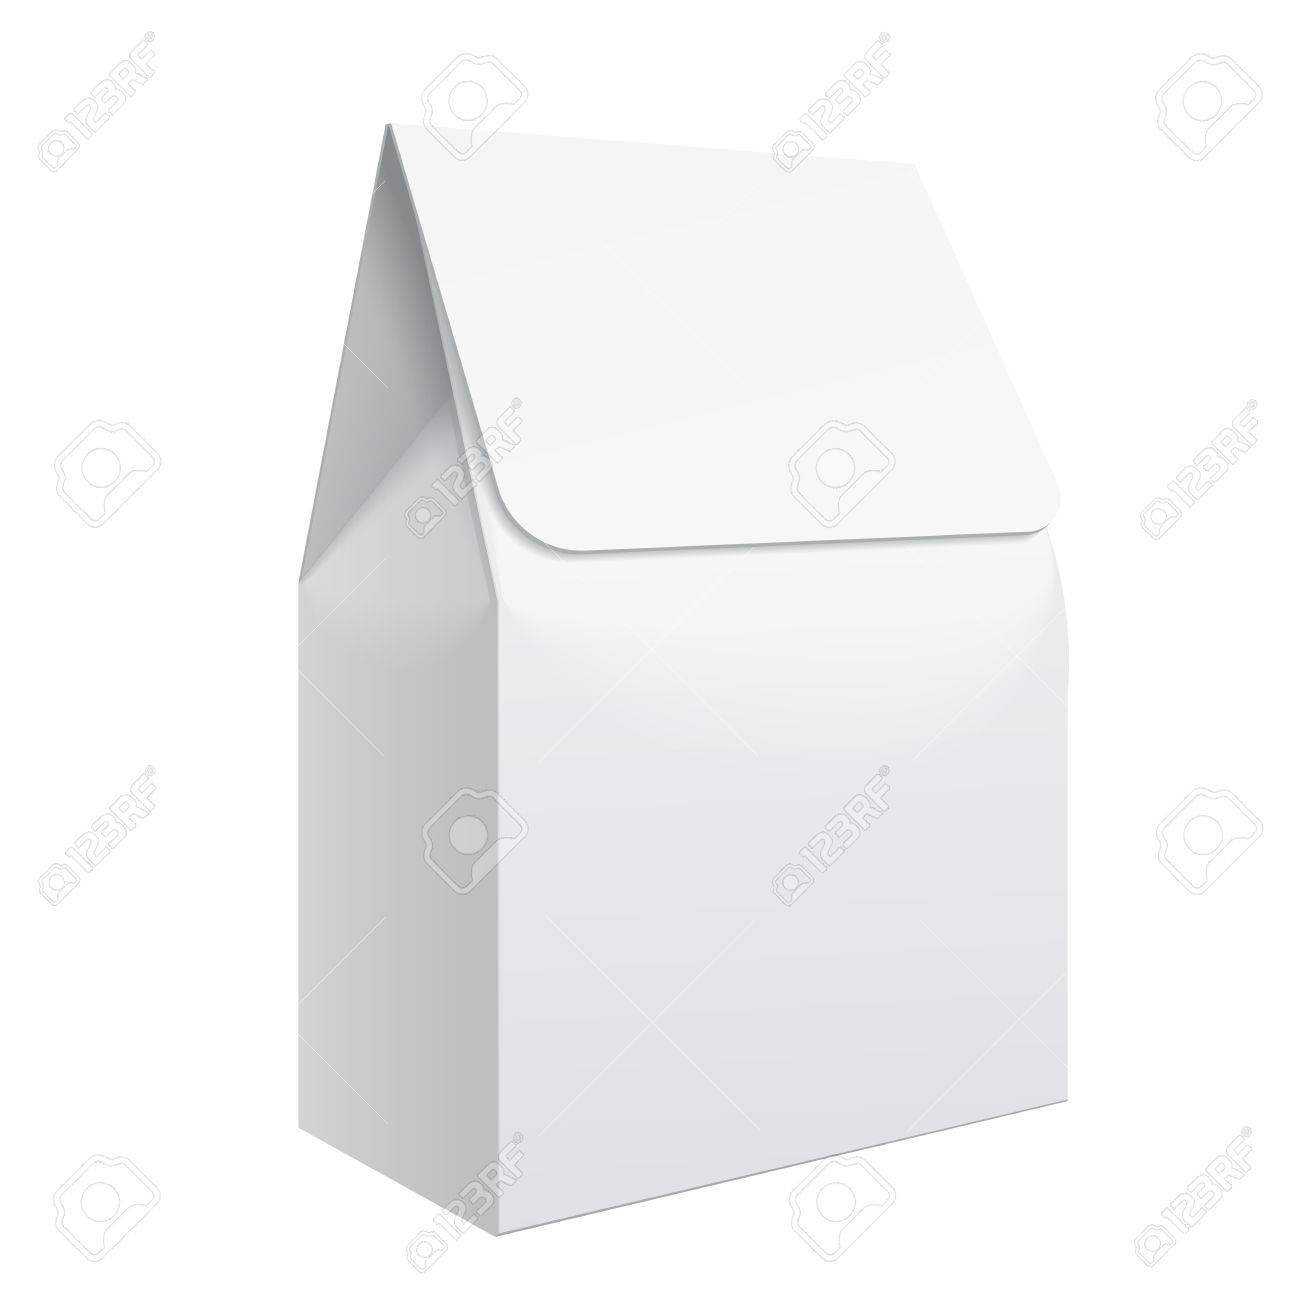 Realistic White Blank Template Packaging For Food. Food Packing.. Intended For Blank Packaging Templates